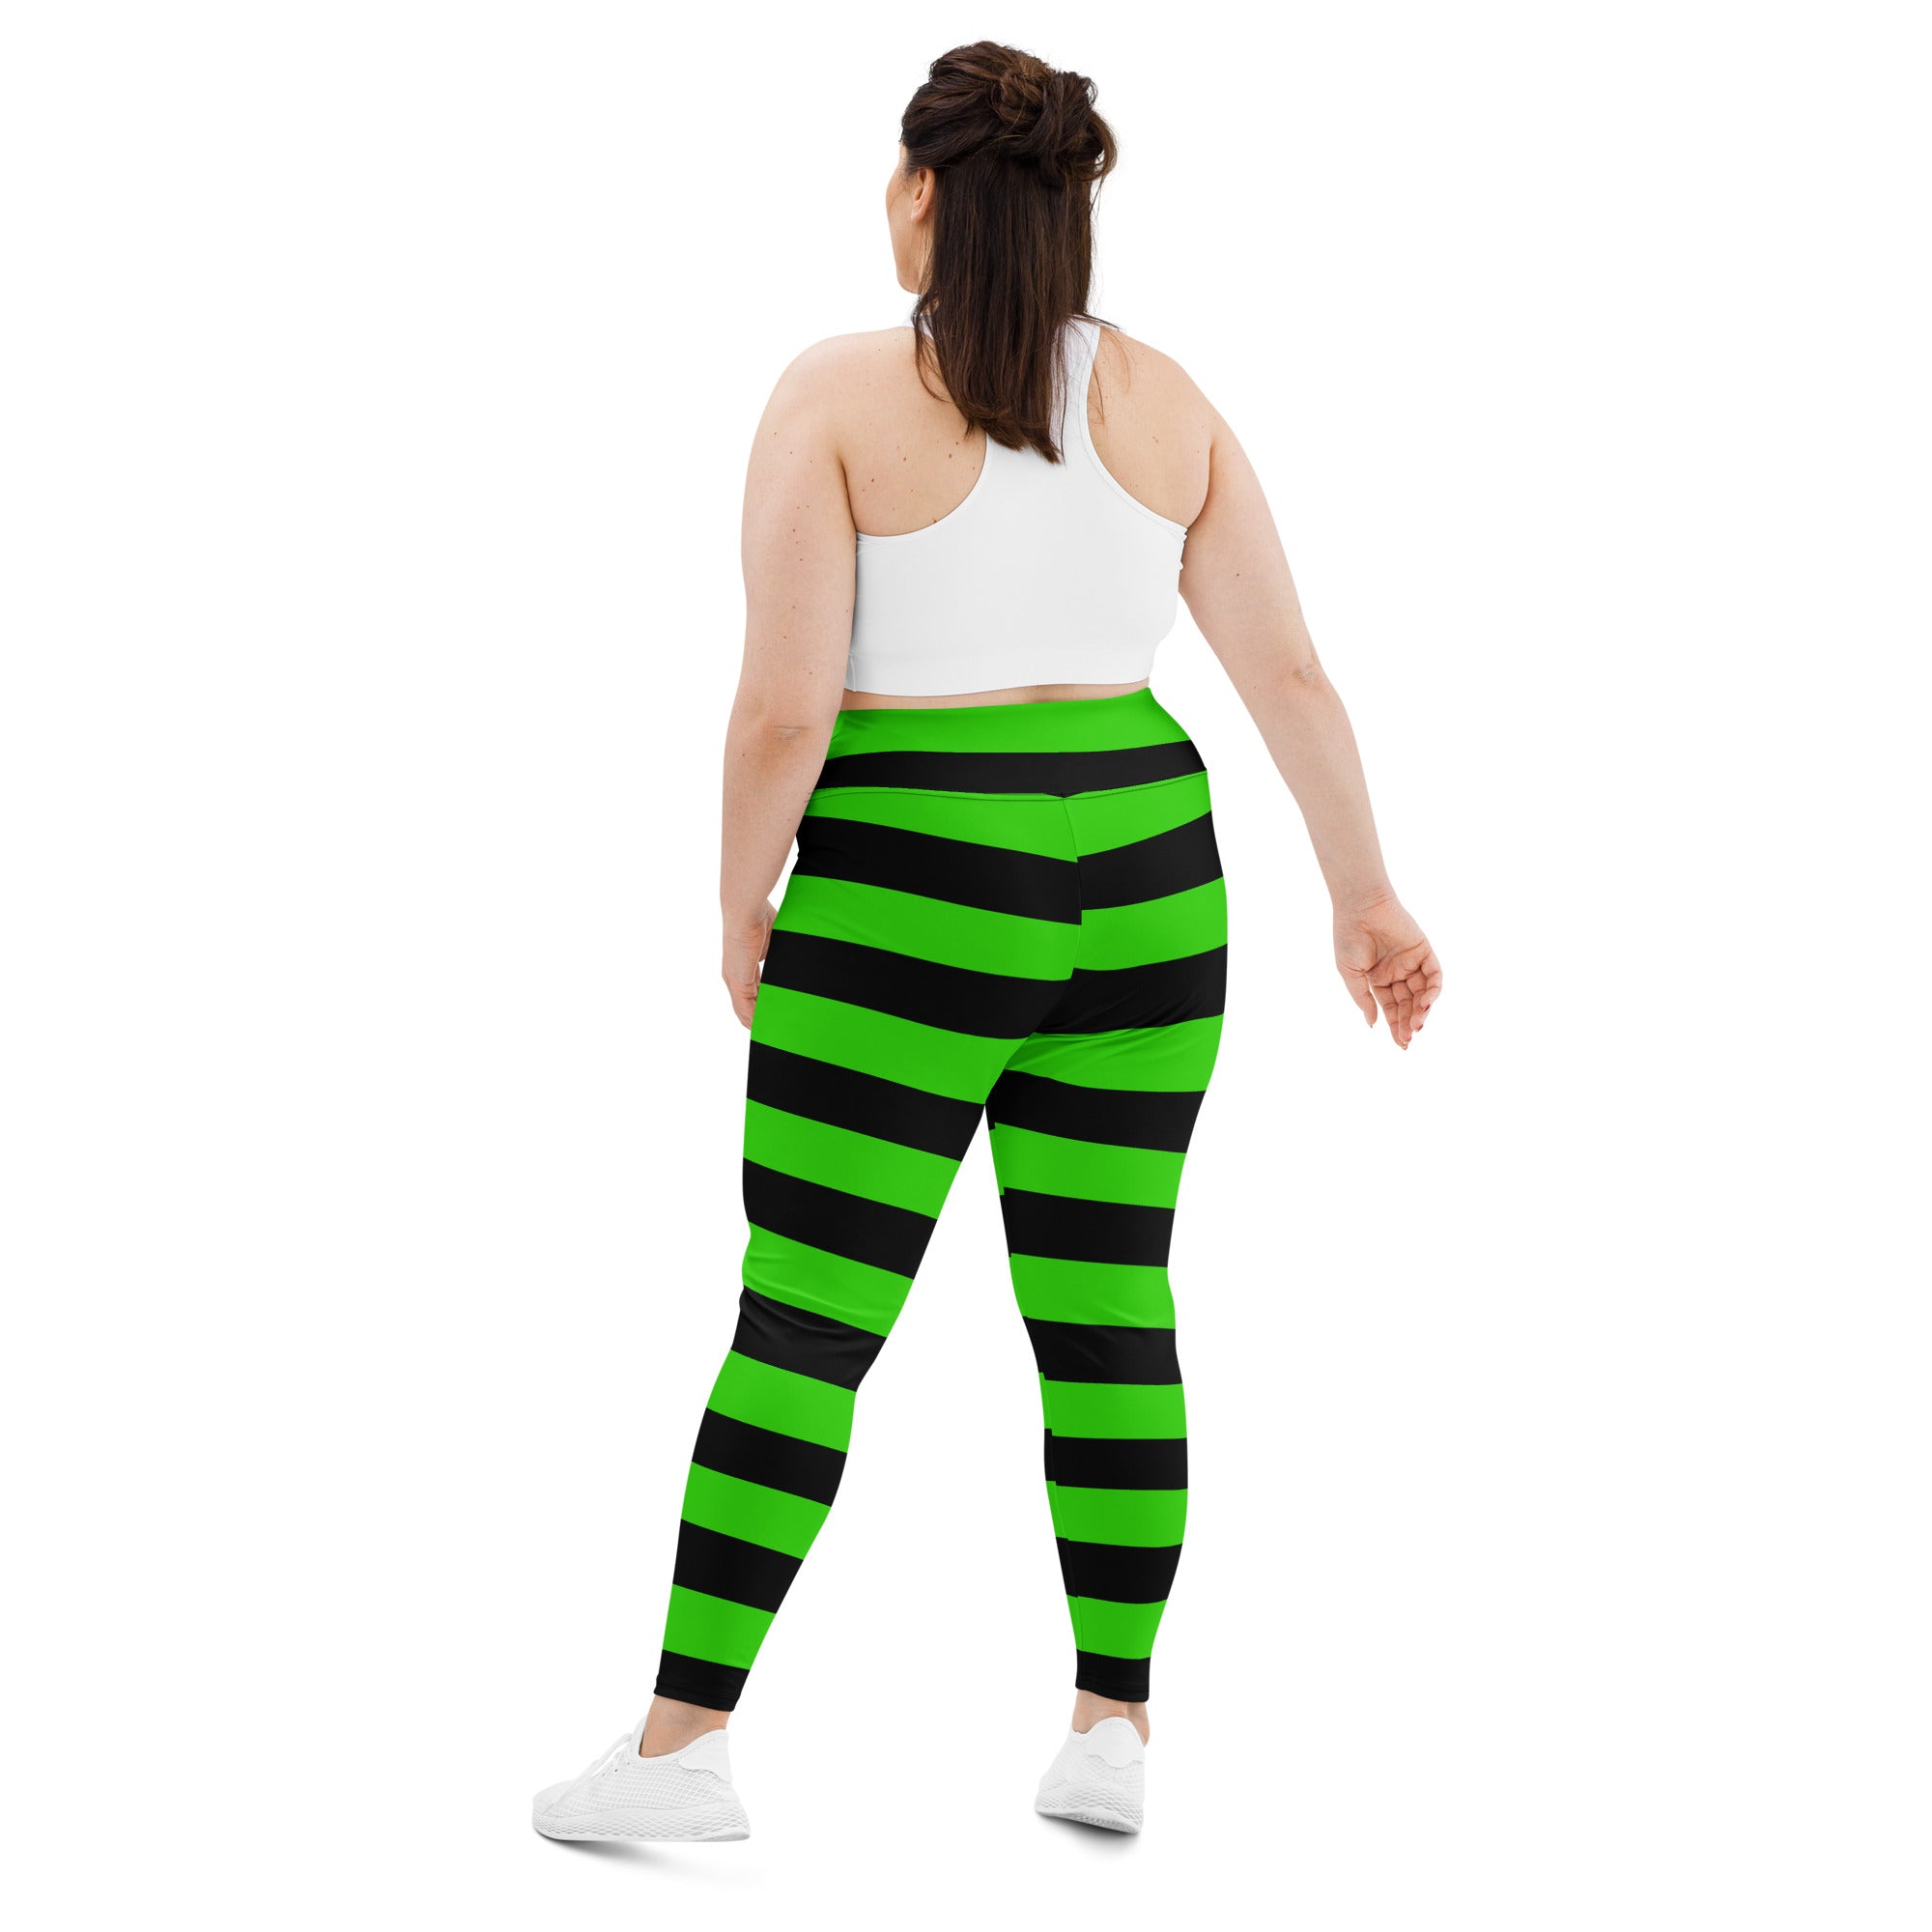 Witch's Green and Black Stripe Plus Size Leggings